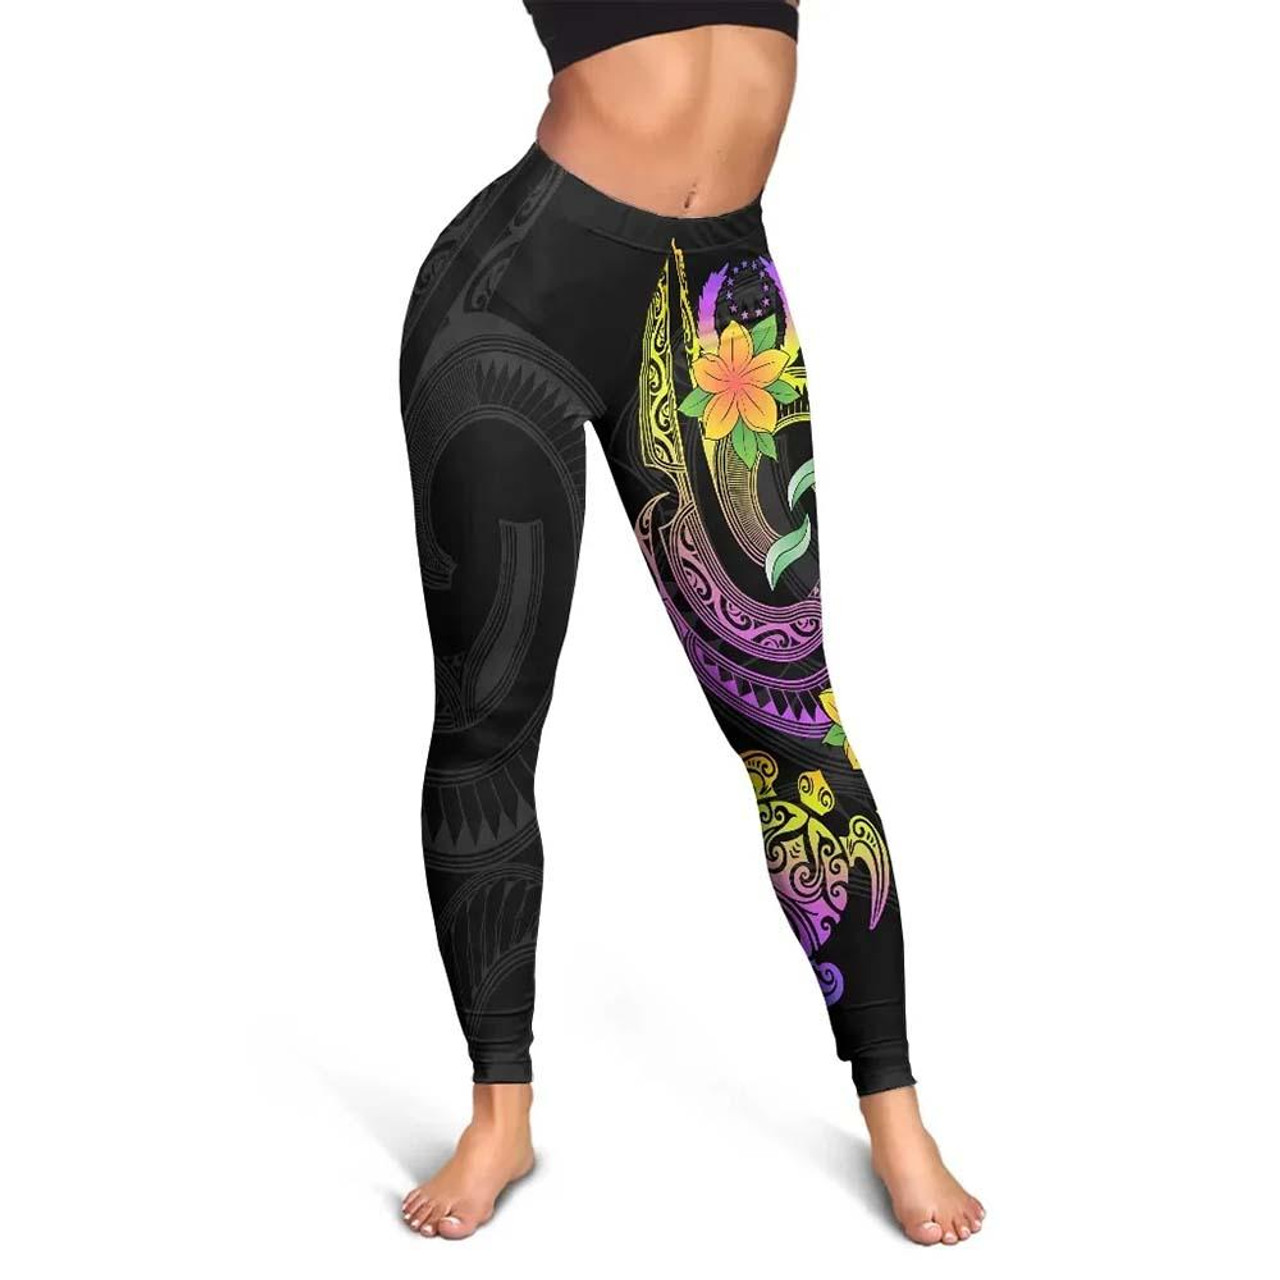 Pohnpei Legging - Plumeria Flowers with Spiral Patterns 4